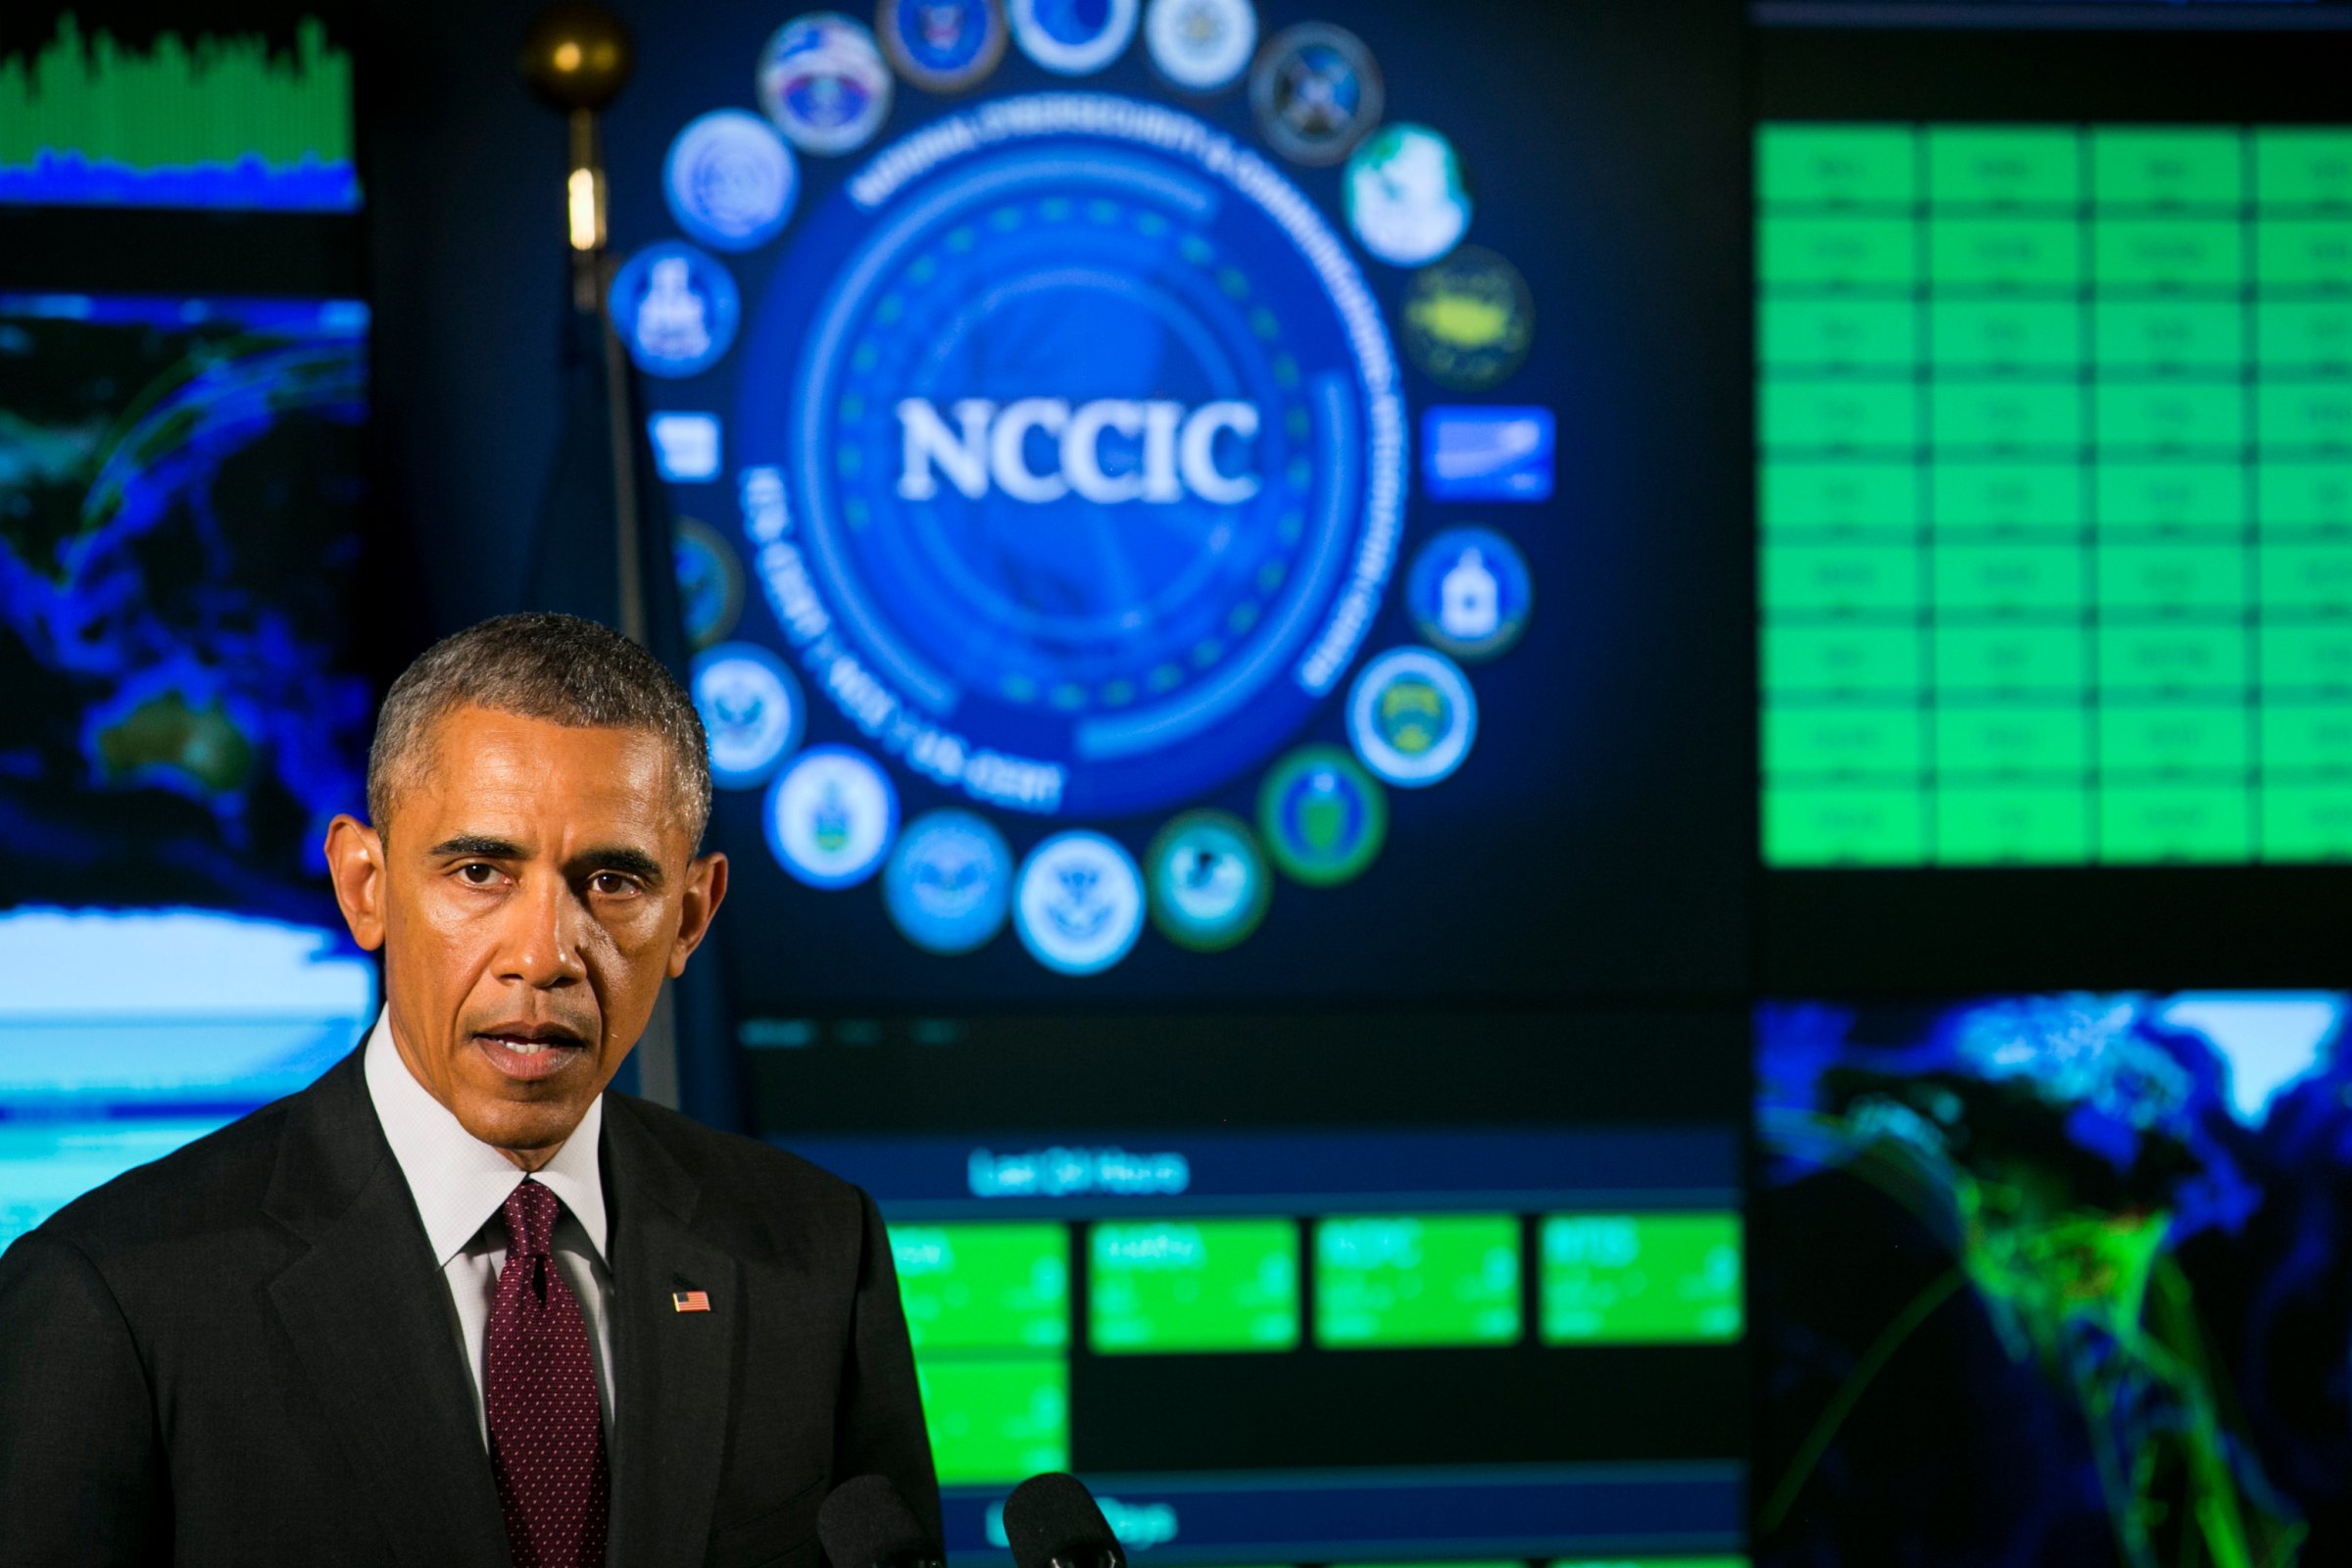 President Obama Delivers Remarks On Cyber Security